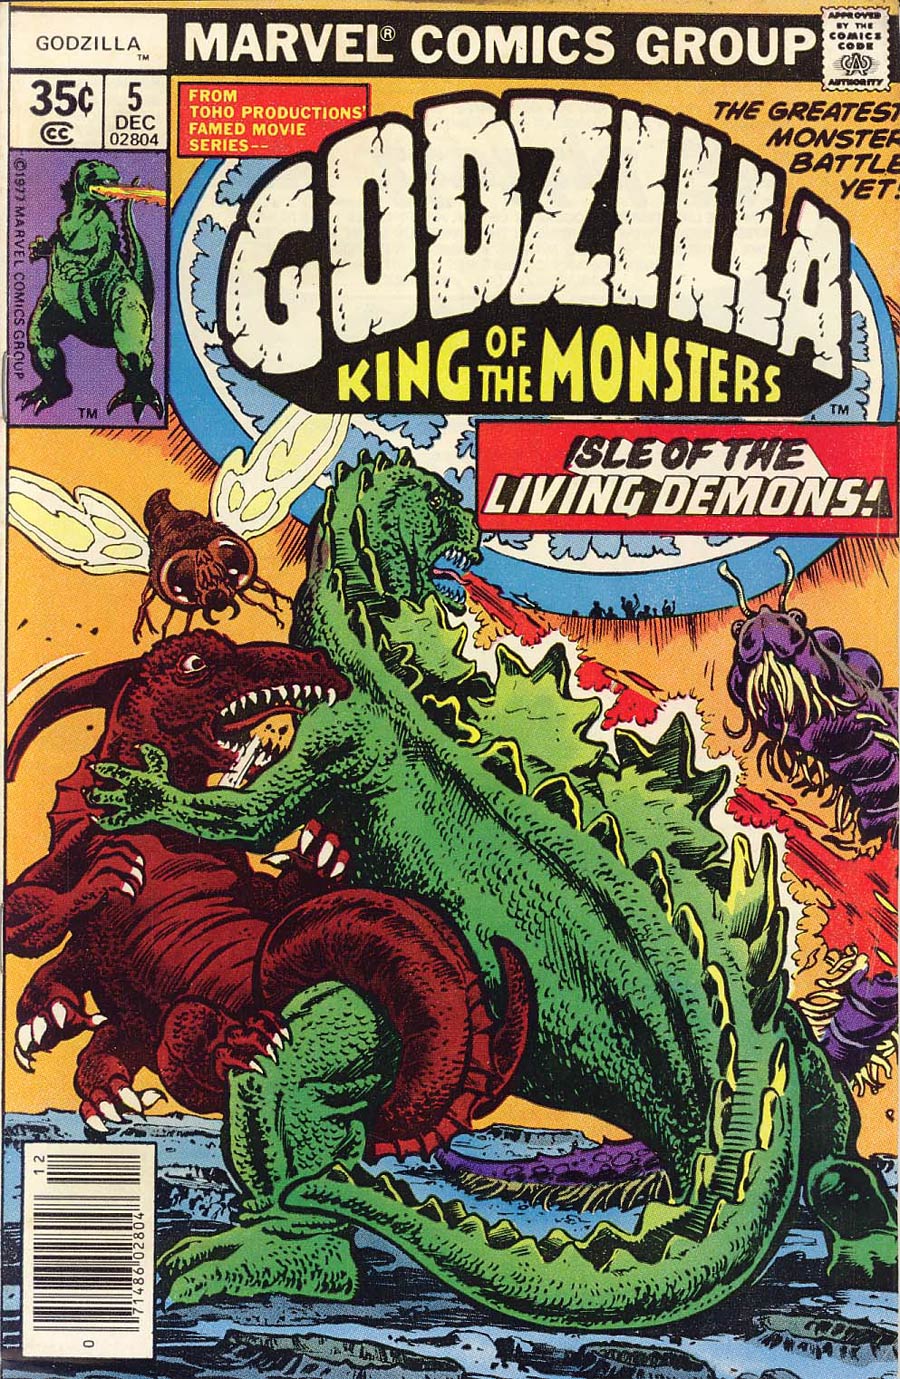 Godzilla King Of The Monsters #5